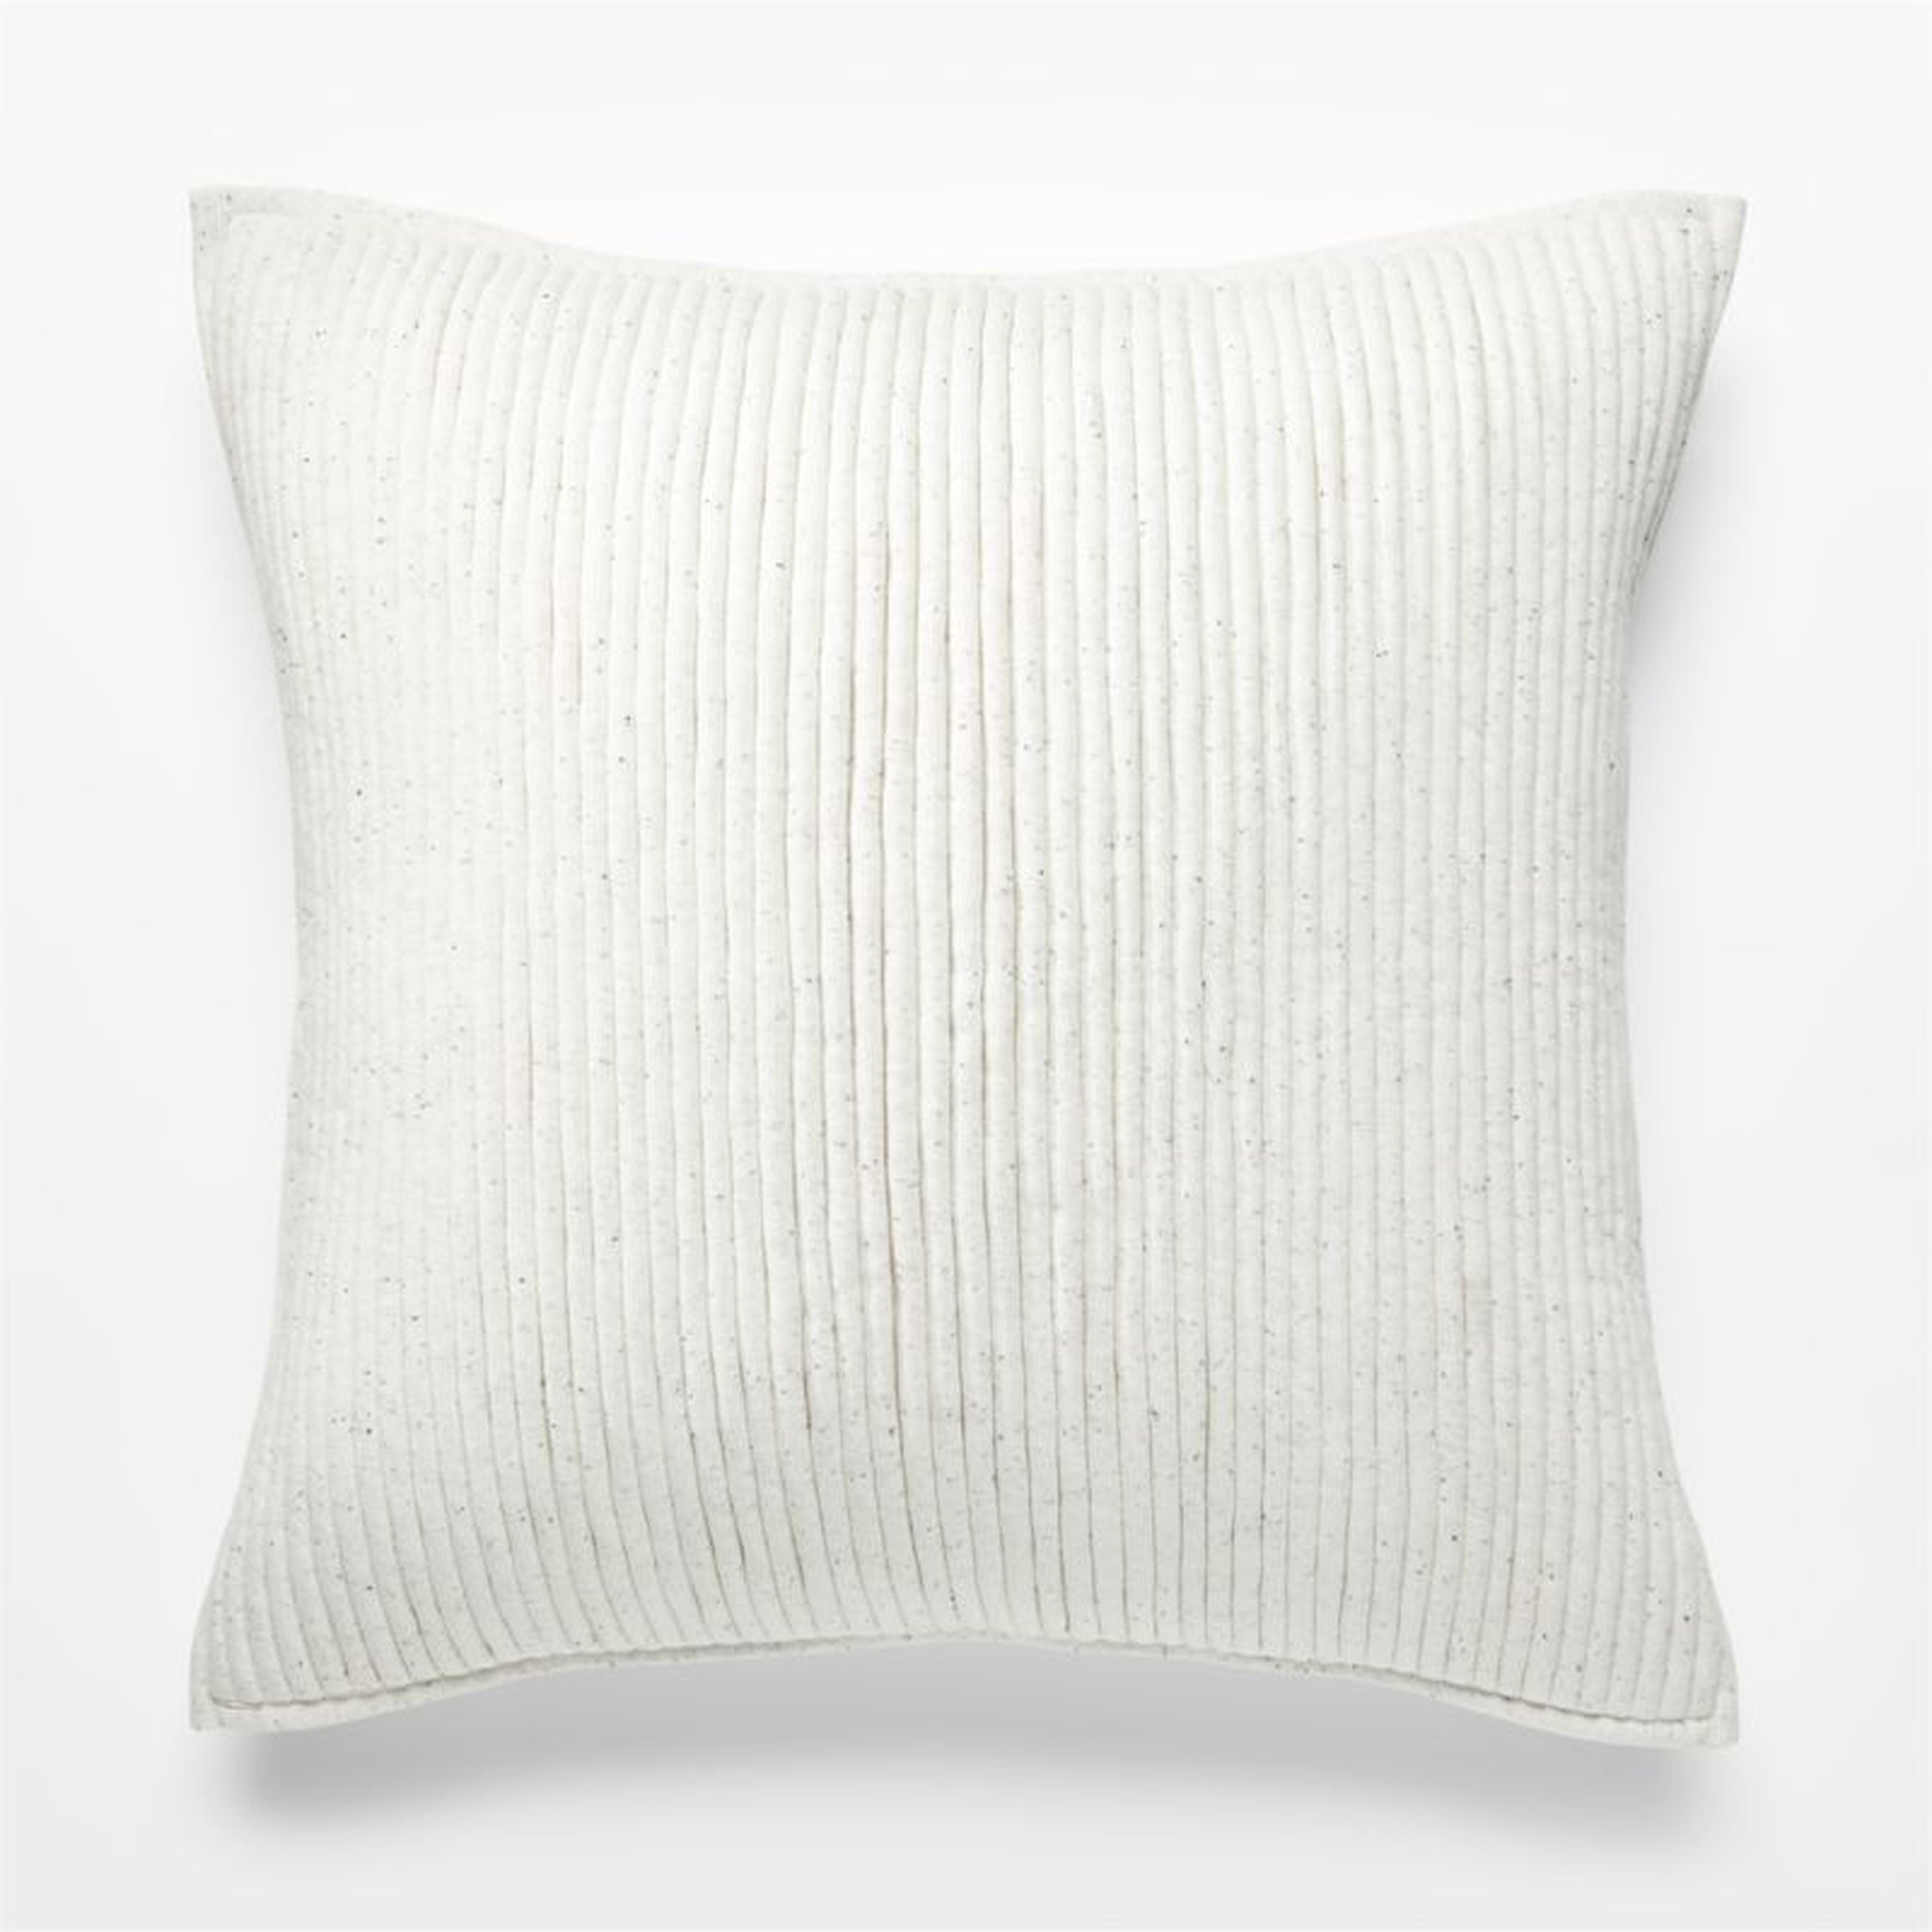 Sequence Jersey Pillow, Ivory, 20" x 20" - CB2